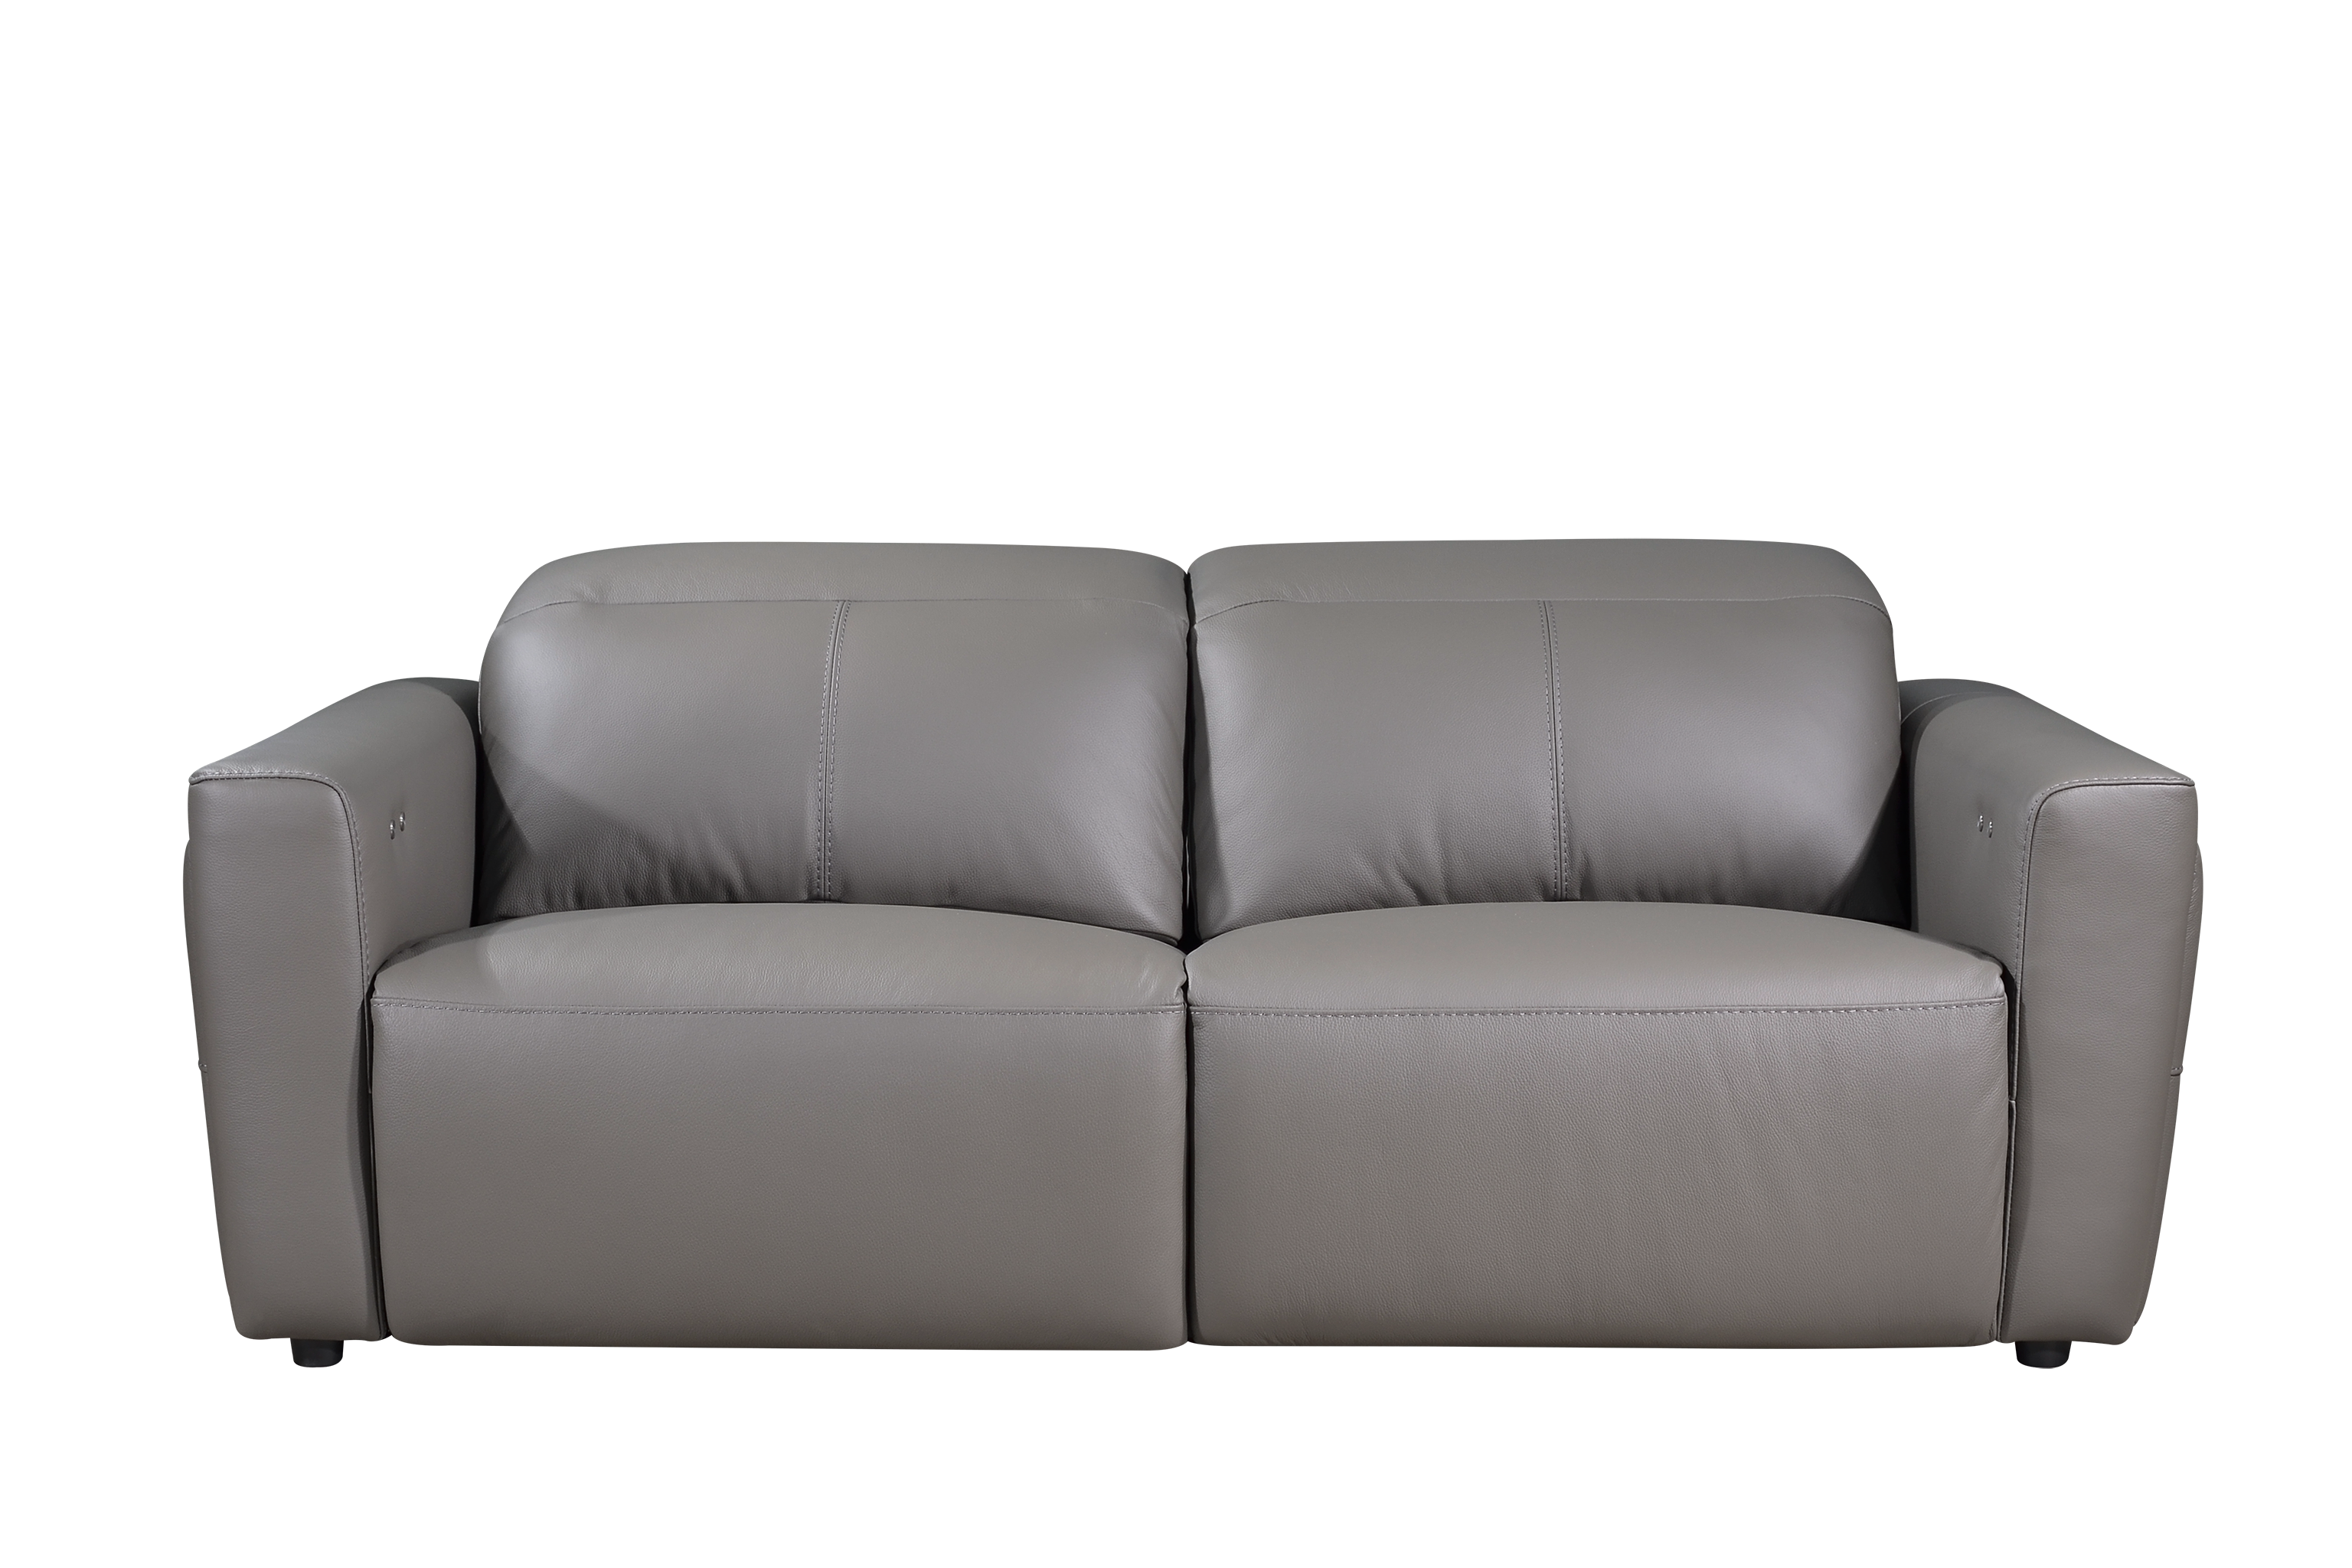 VINCI 2.5 Seater Recliner Sofa in Leather by Castilla